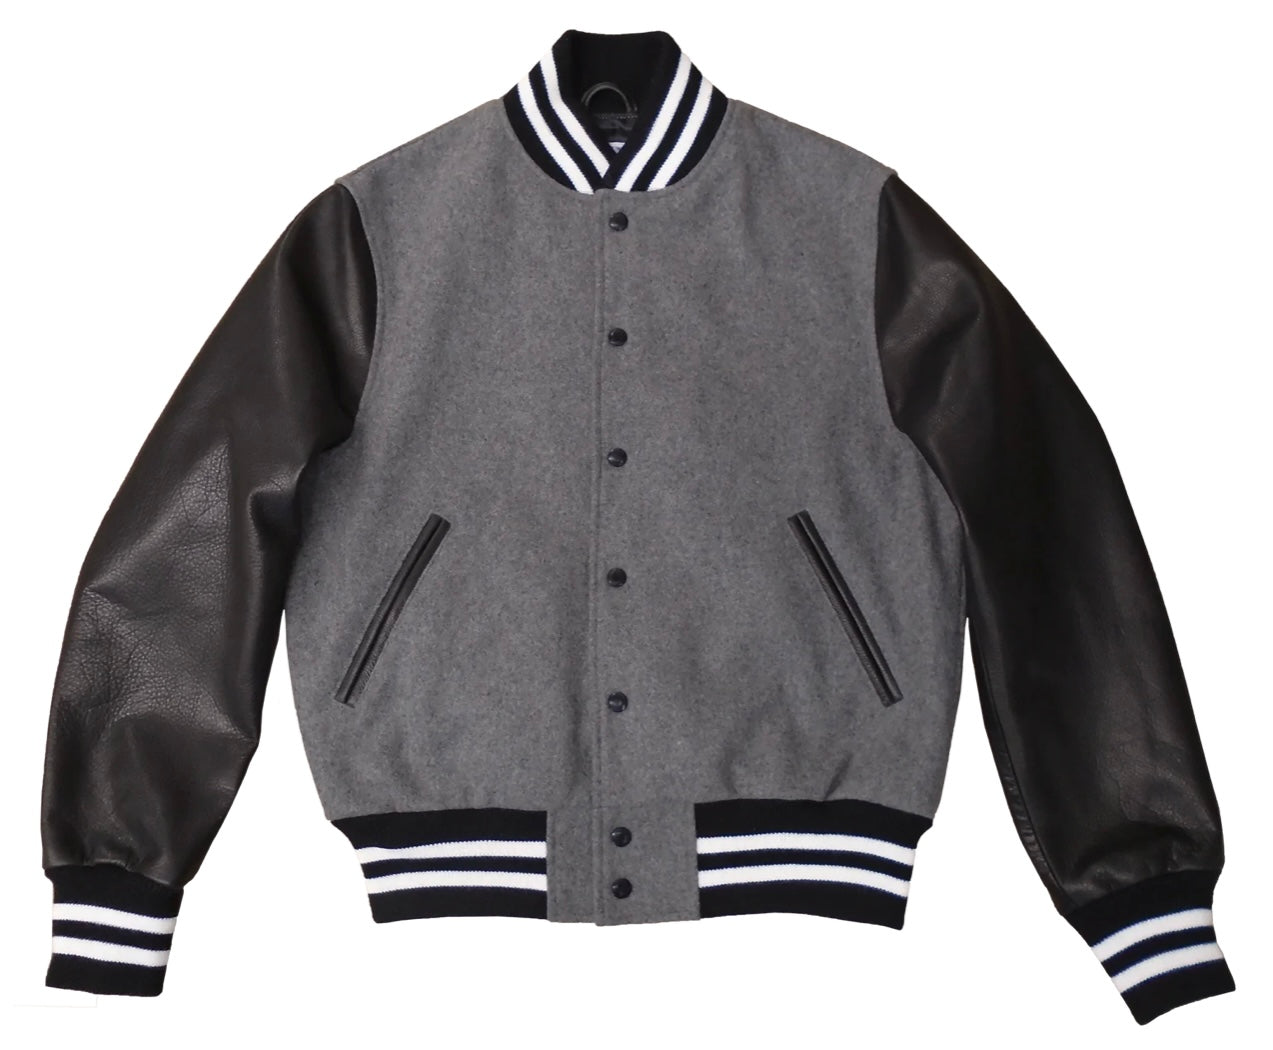 R P LUXURY VARSITY JACKET / GREY WOOL / BLACK LEATHER / HAND MADE IN USA / XS TO 4-XL